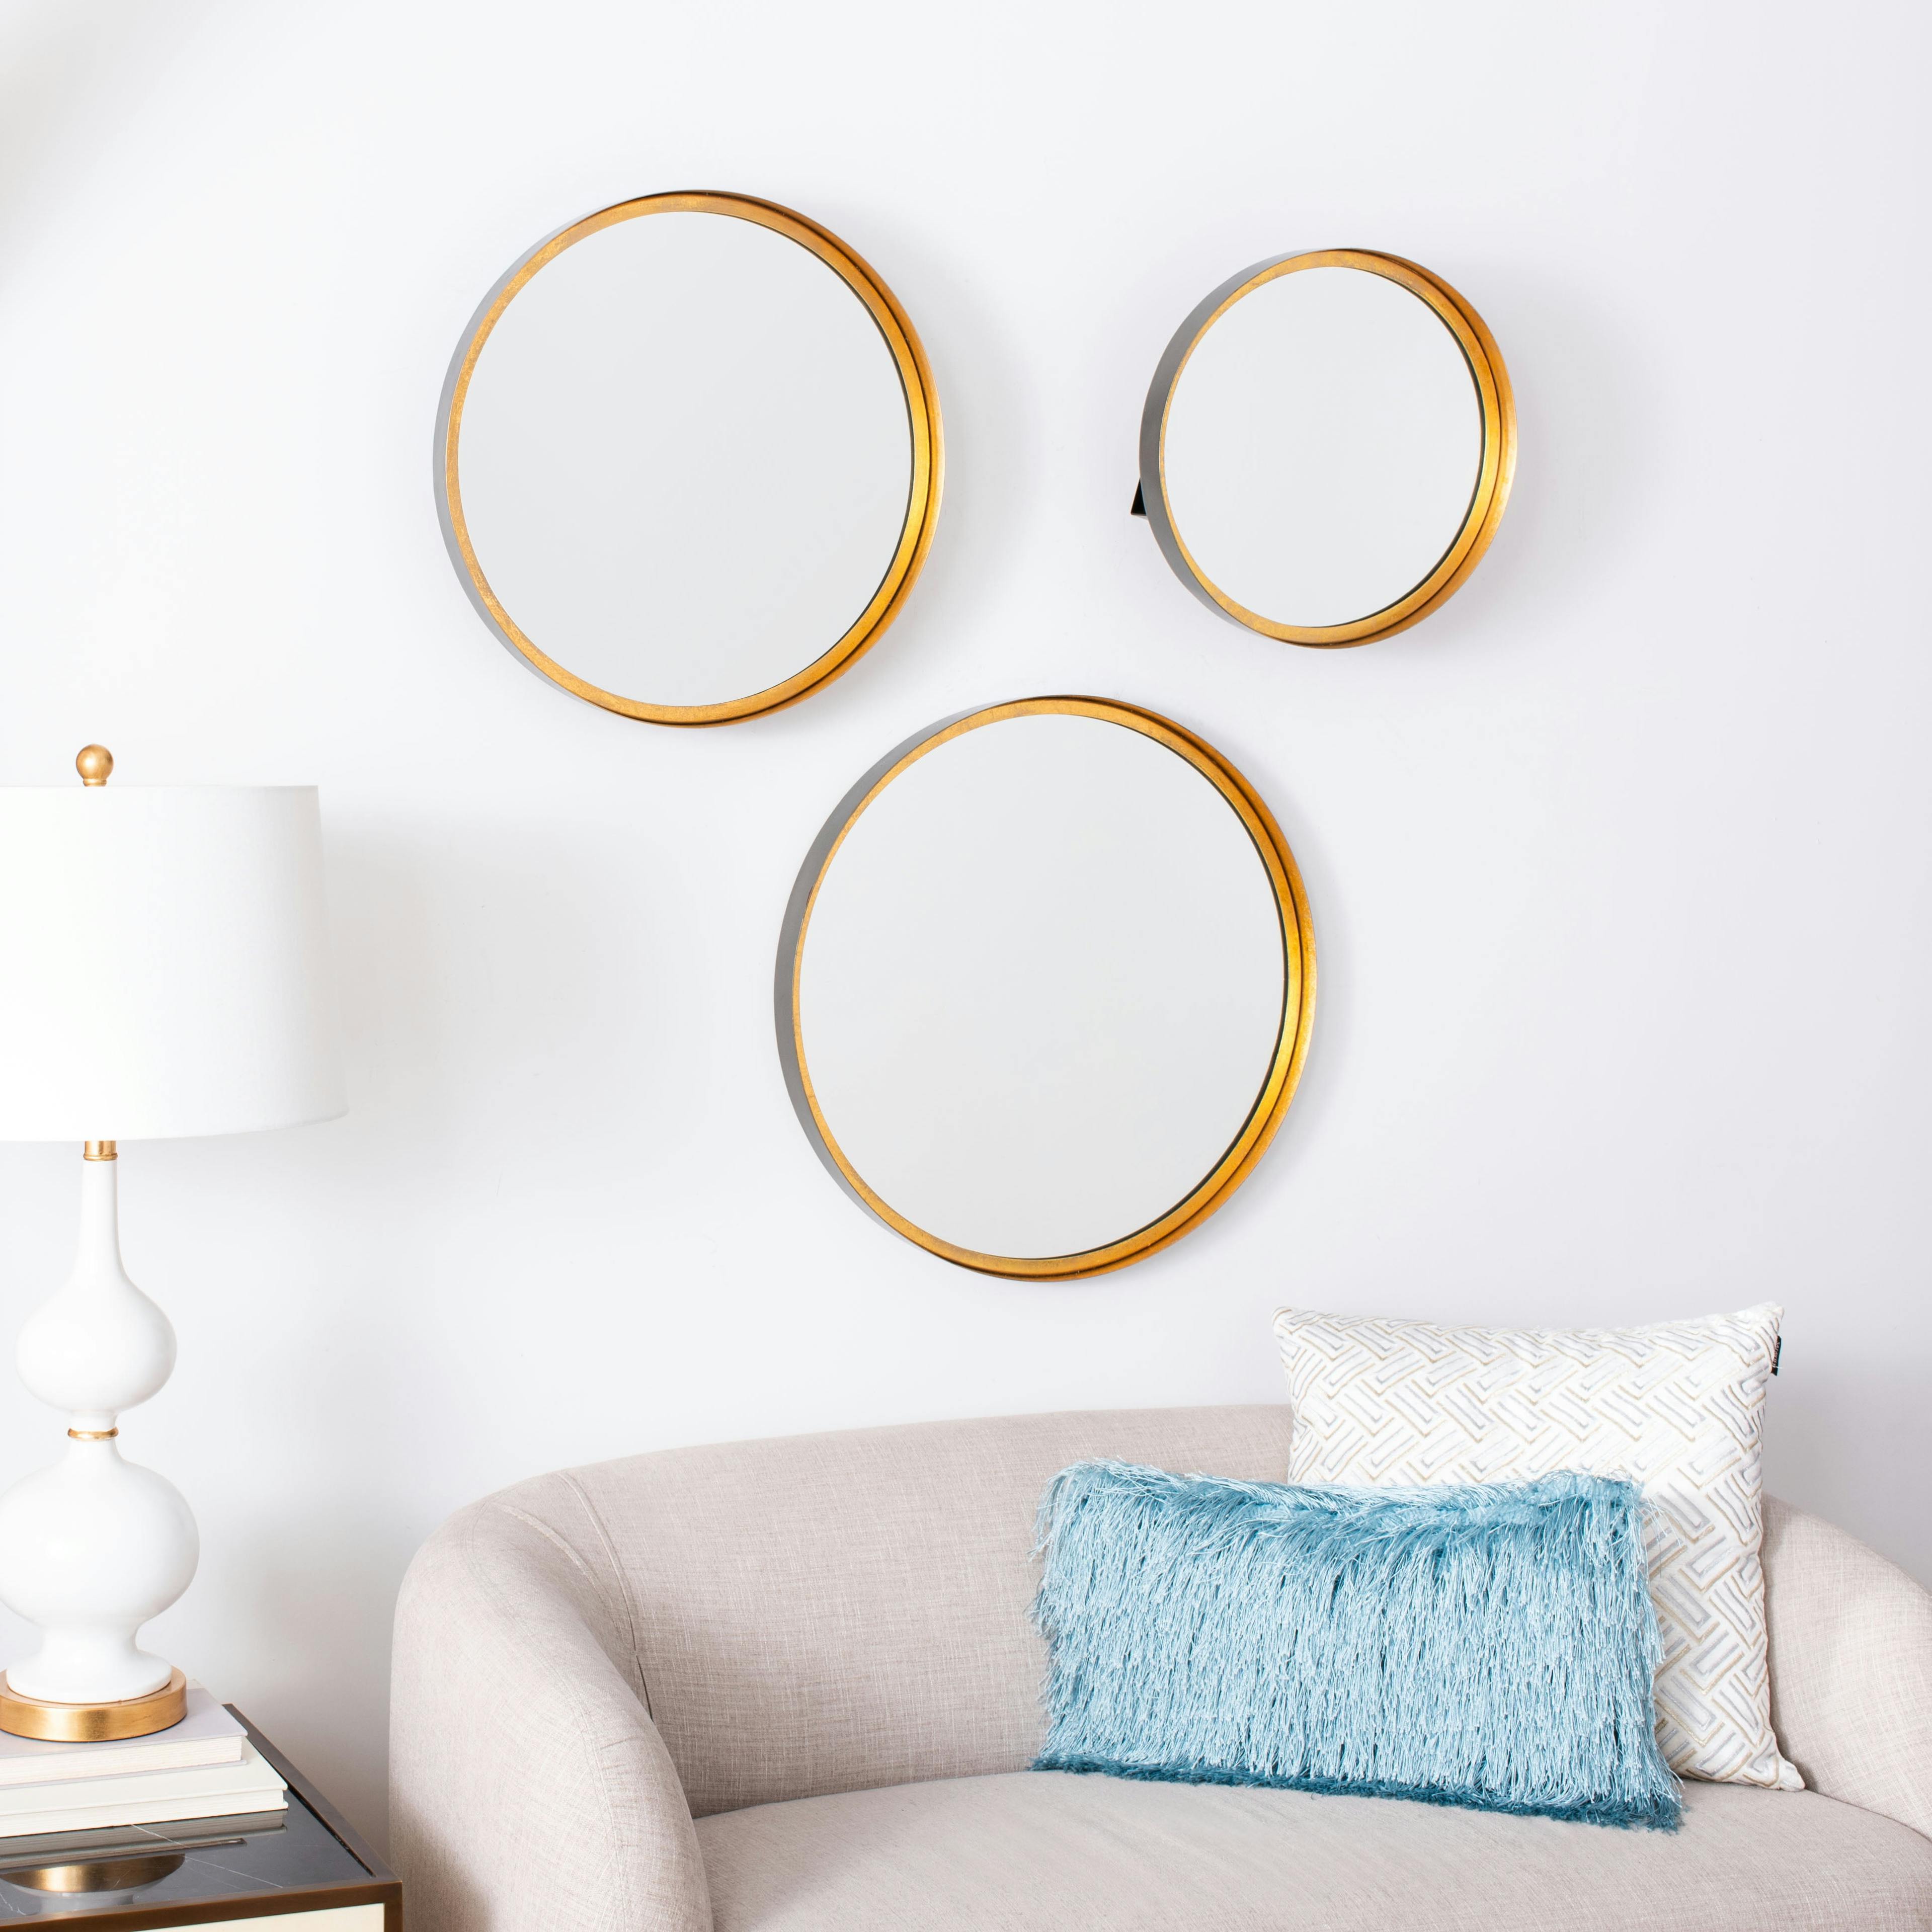 Mid-Century Mod Round Wood Mirror with Gold Foil Accents, Set of 3